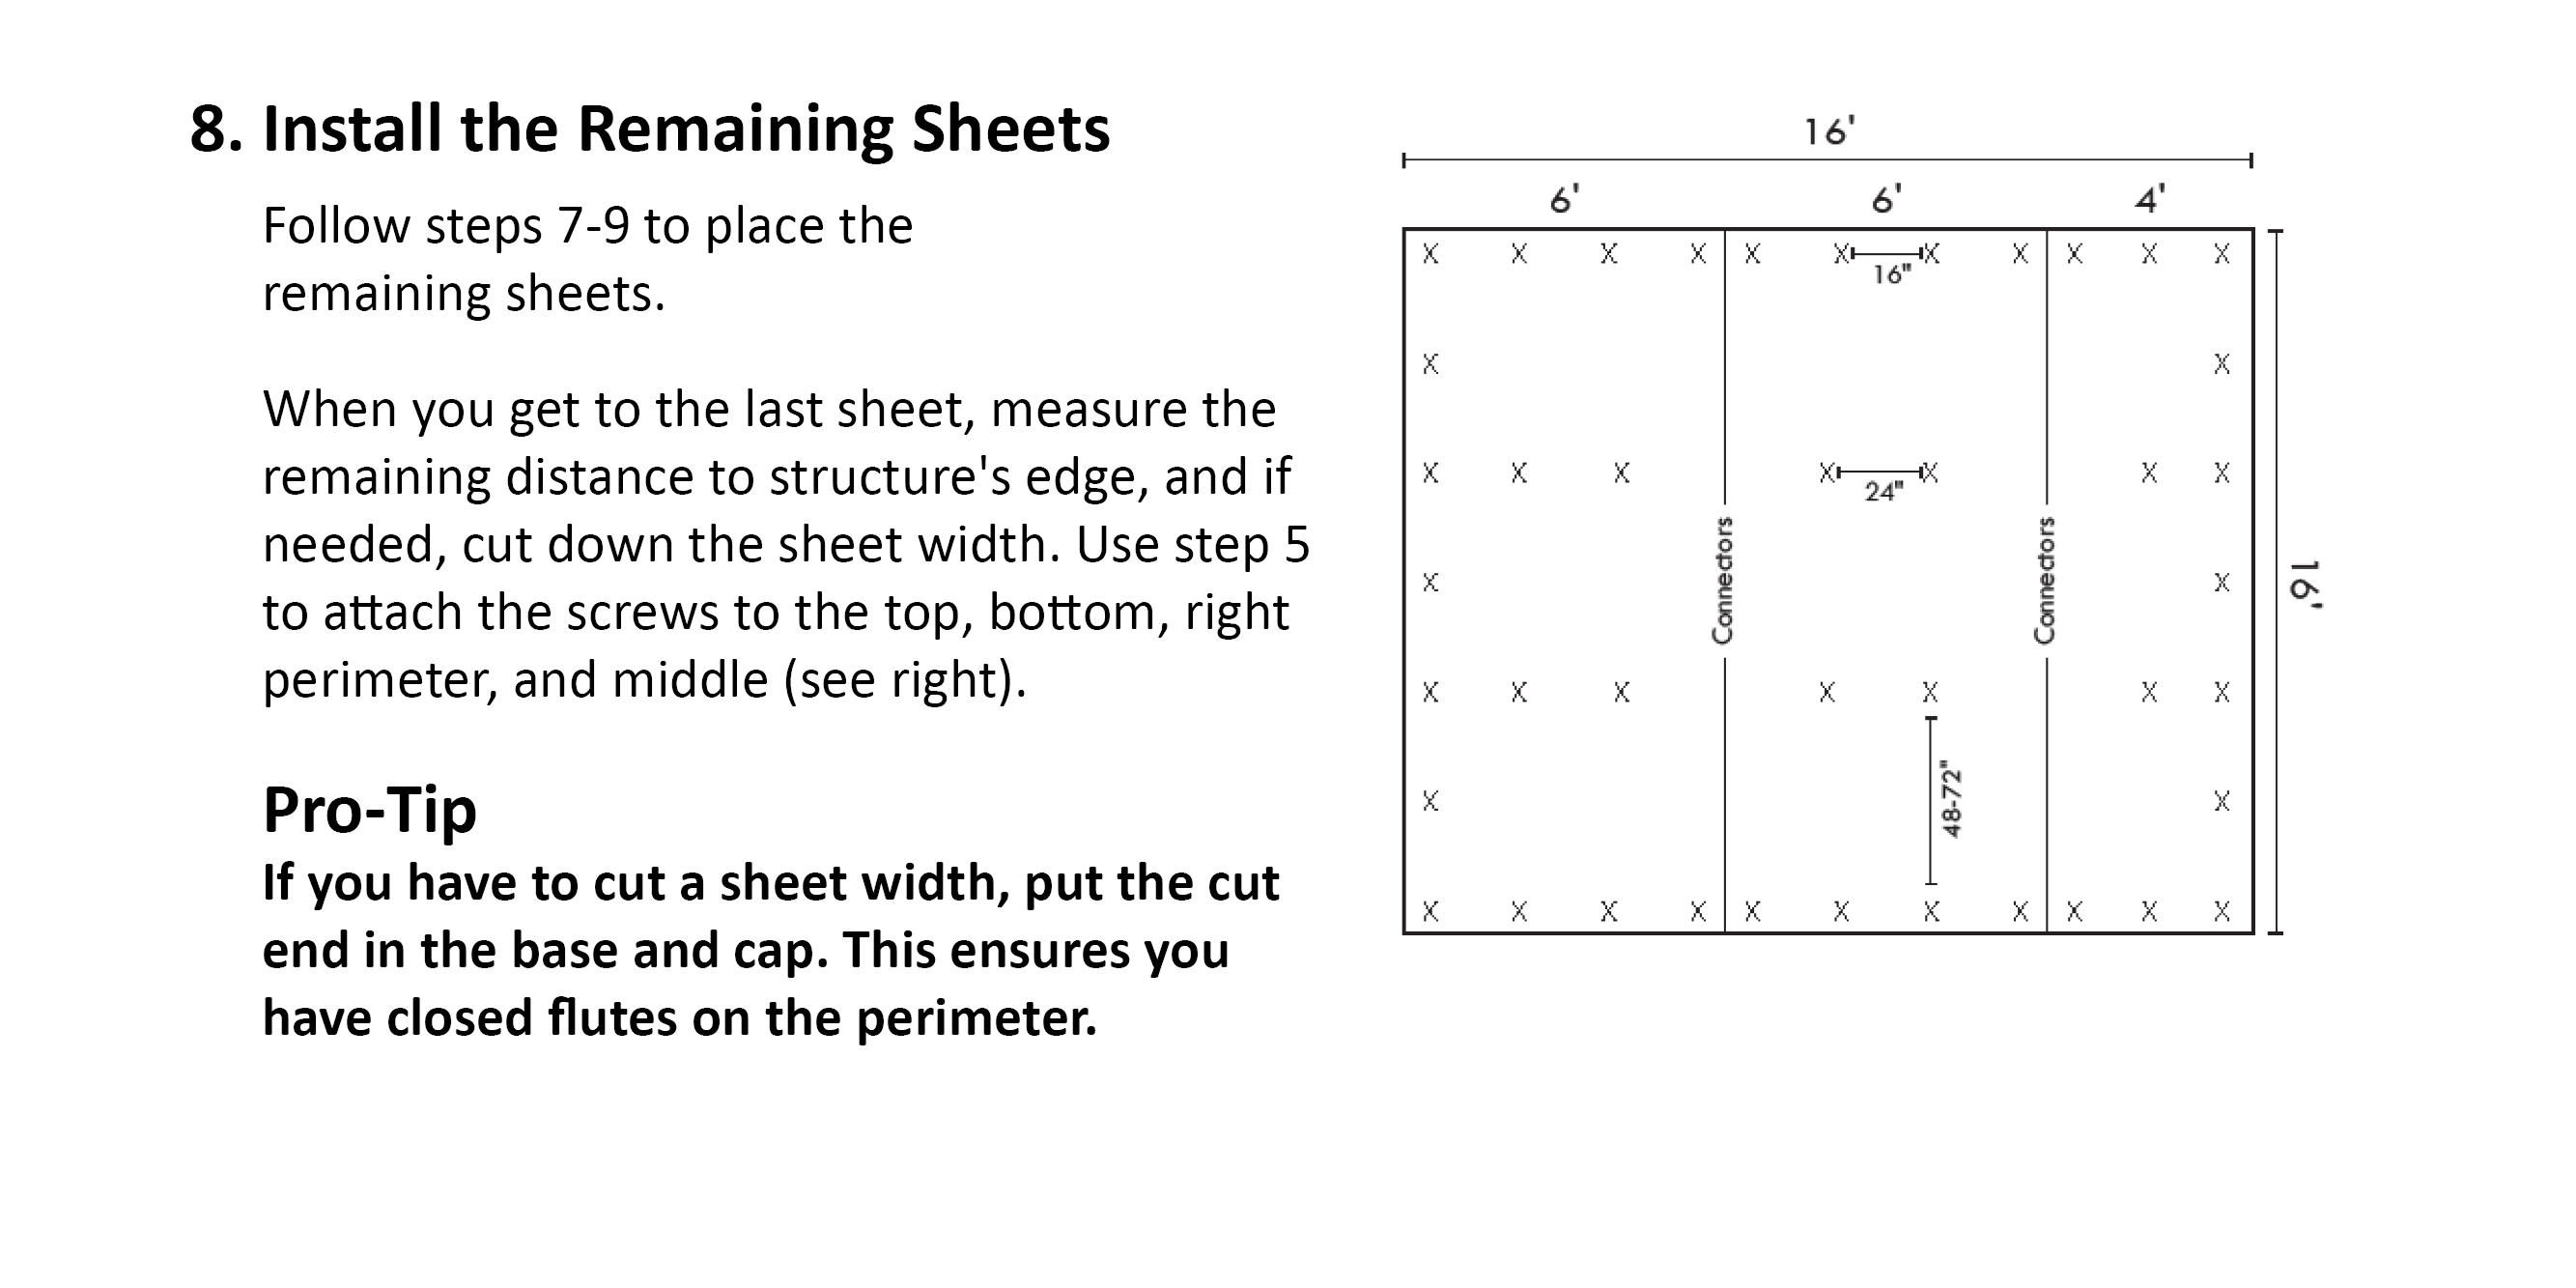 Install the Remaining Sheets